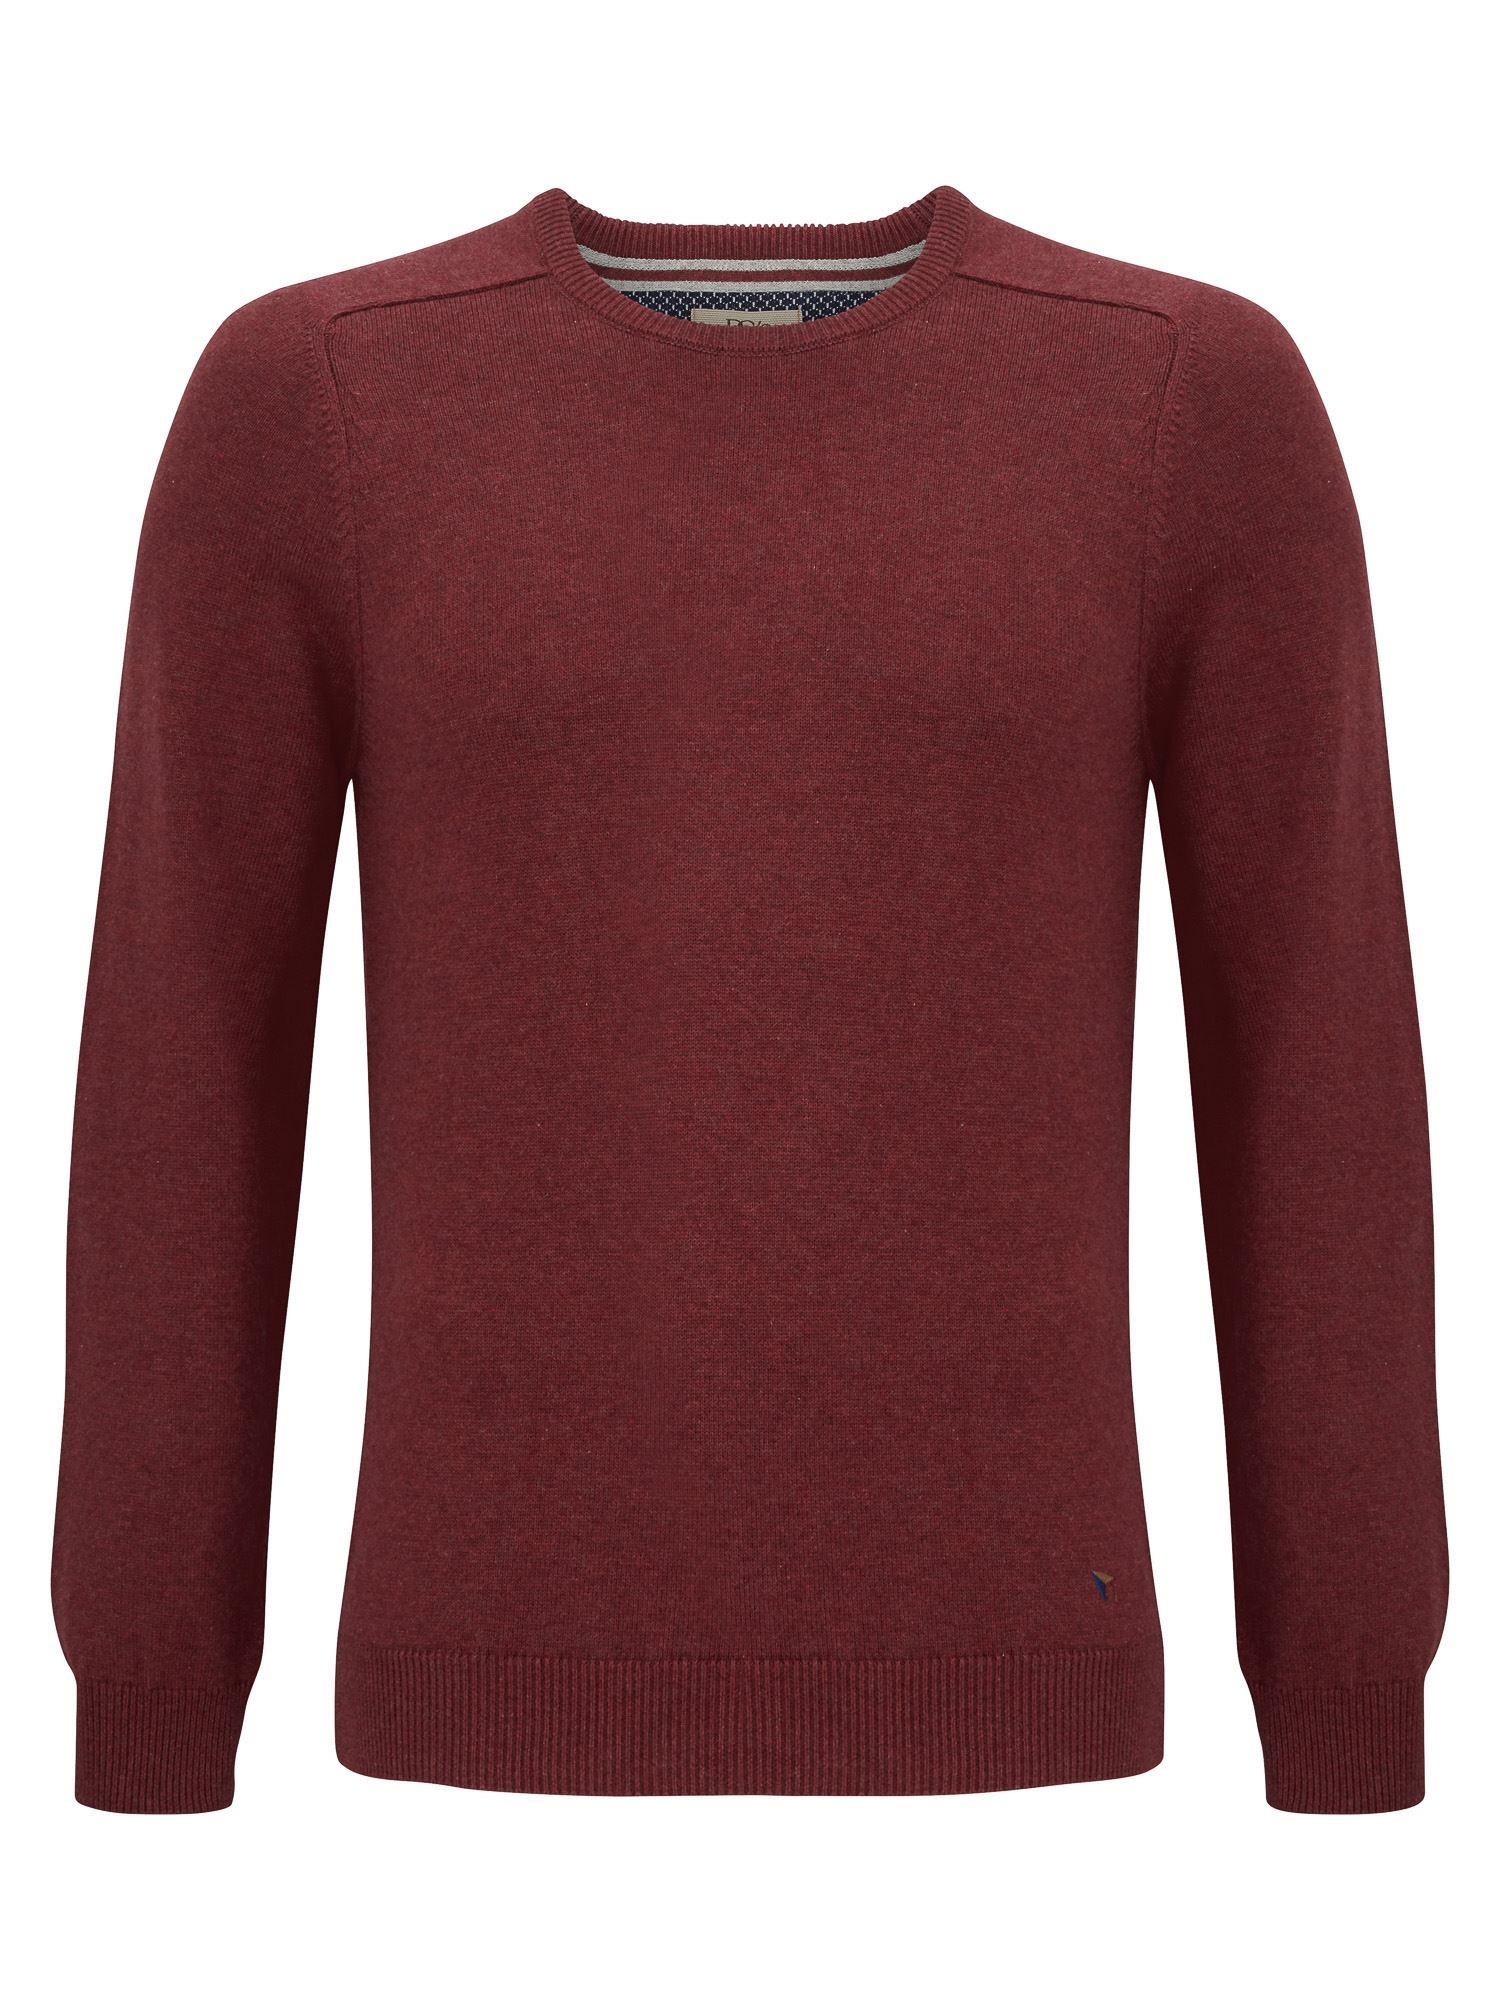 Picture of Daniel Grahame Crew Neck Pullover Drifter 55930